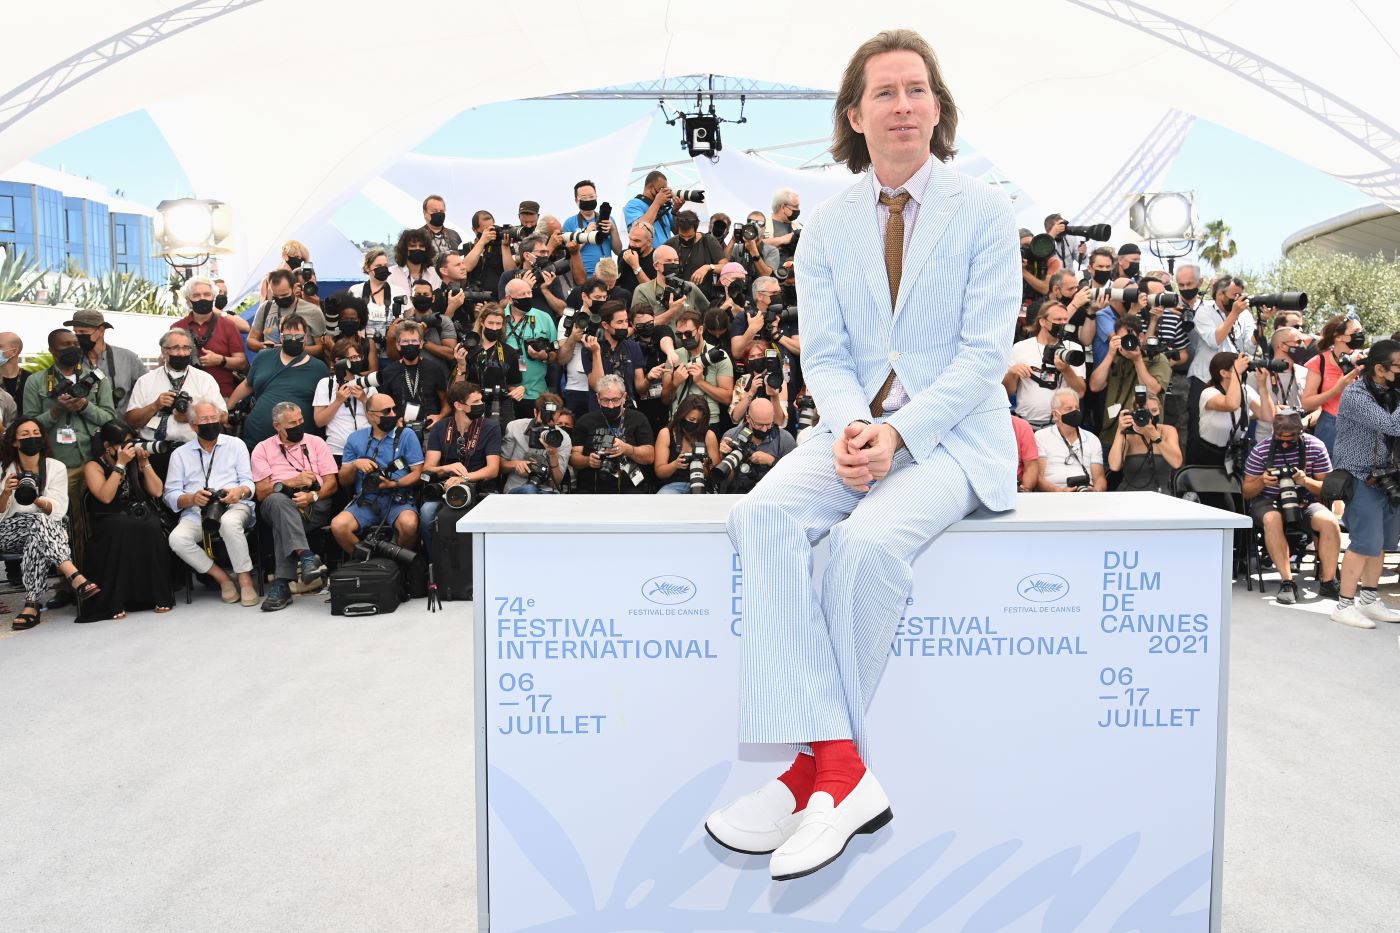 Wes Anderson, director of 'The French Dispatch' sitting on a white box with blue writing dressed in a blue pin stripe suit in front of a masked audience.